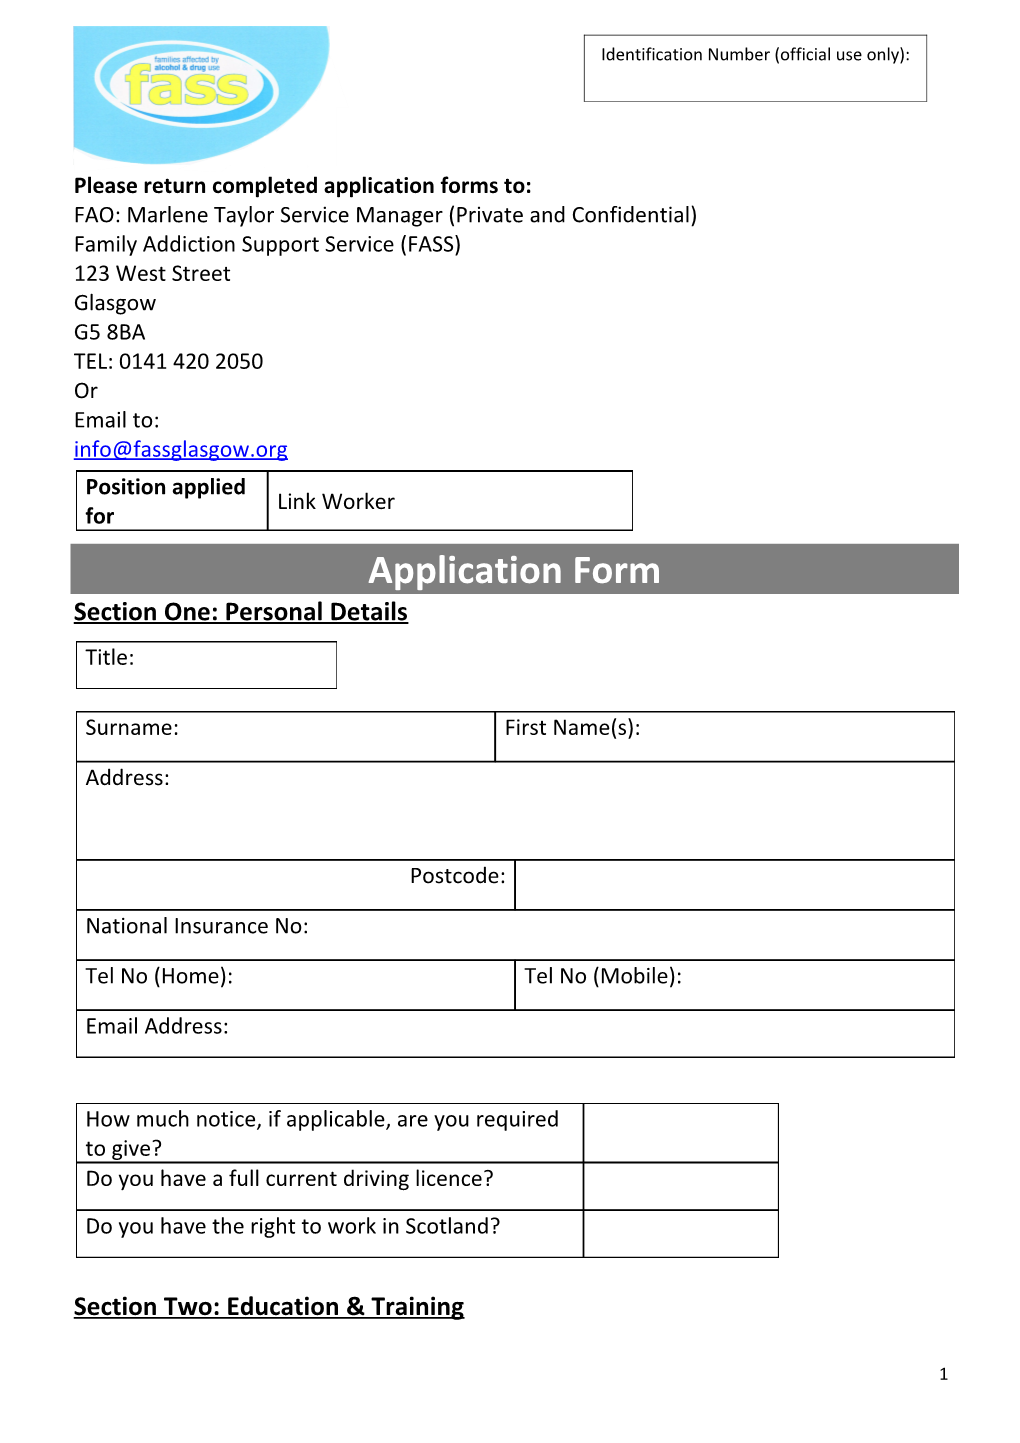 Please Return Completed Application Forms To